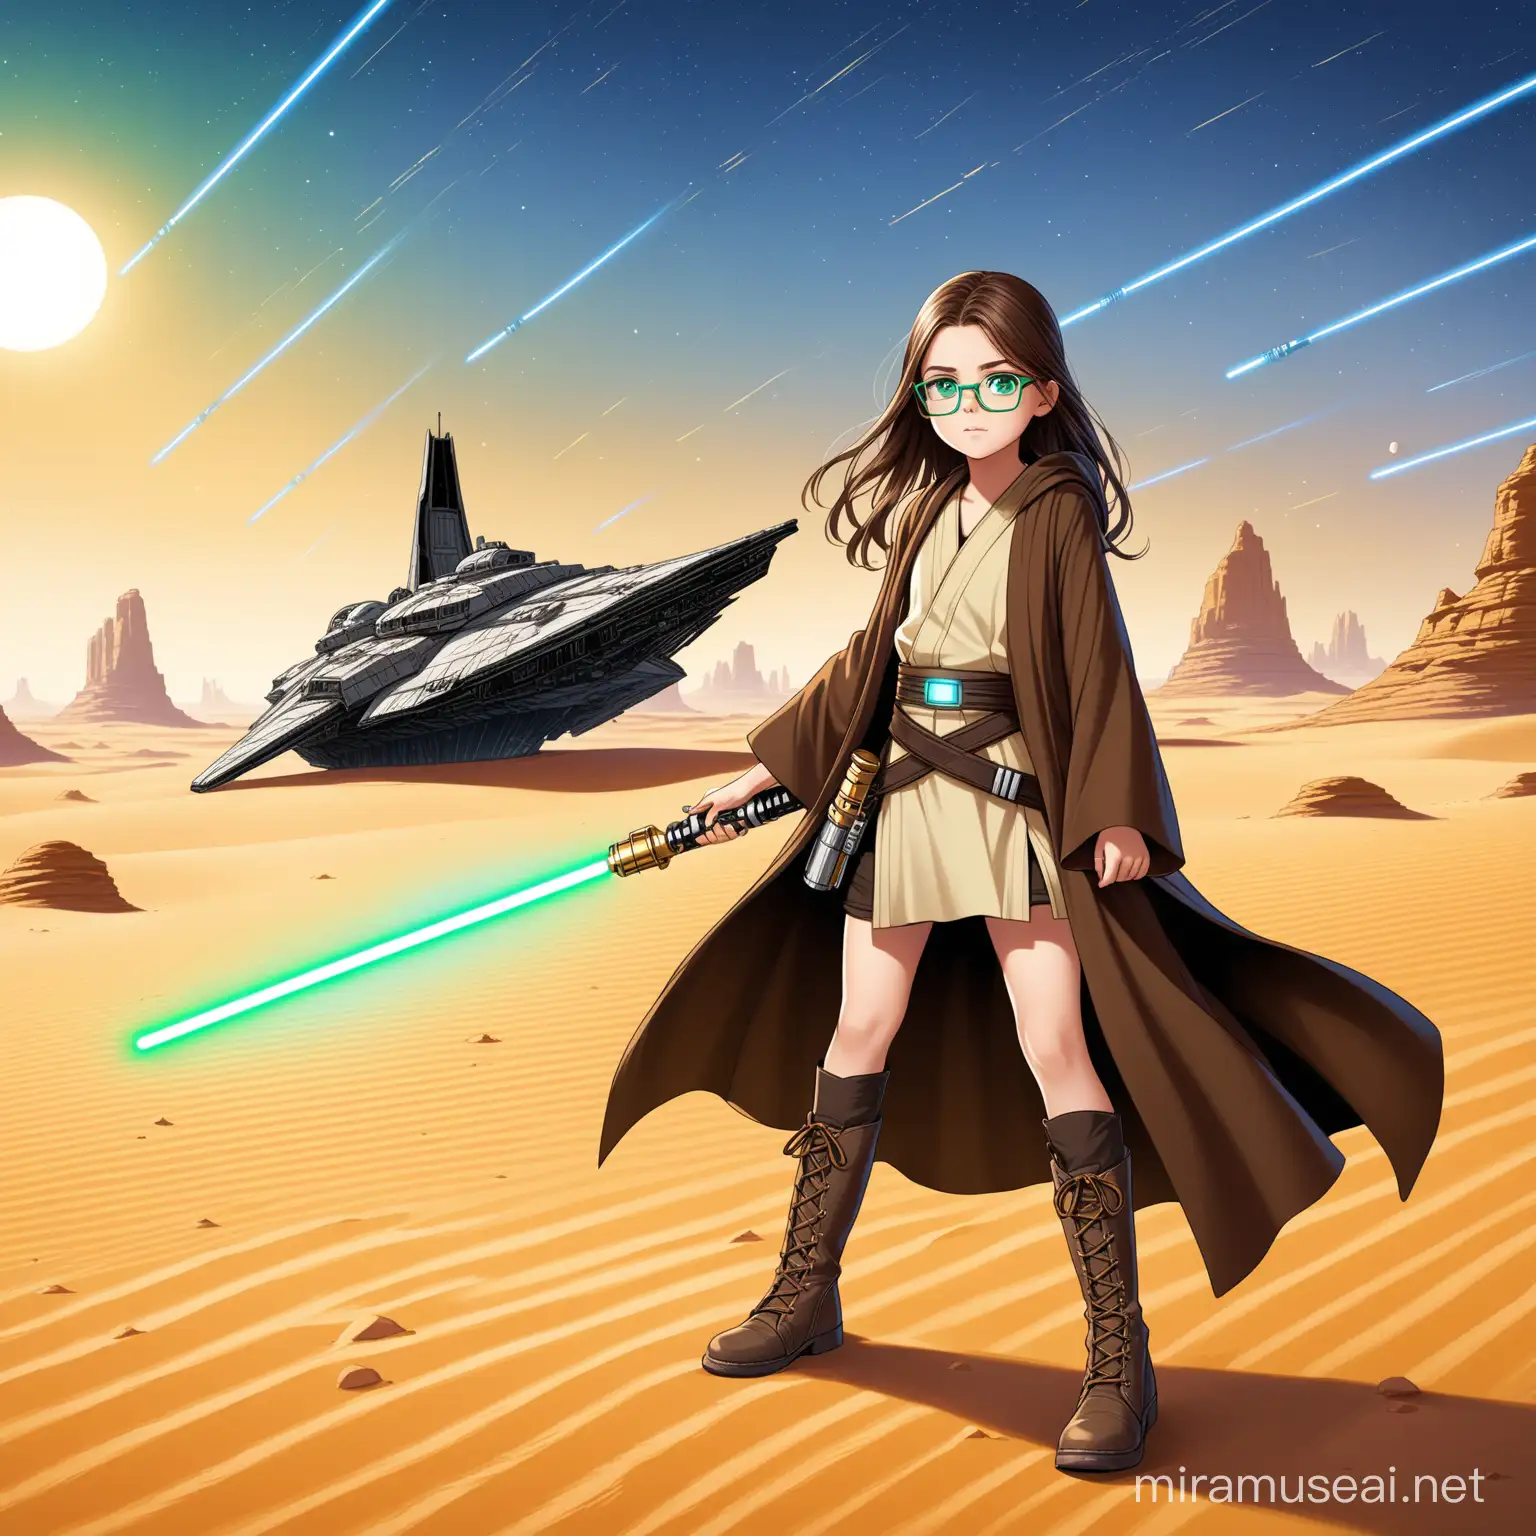 11 year old girl, long brown hair with gold highlights, jedi robes, gold lightsaber, black laced up boots, background desert with a crashed star ship, green eyes, blue glasses, 